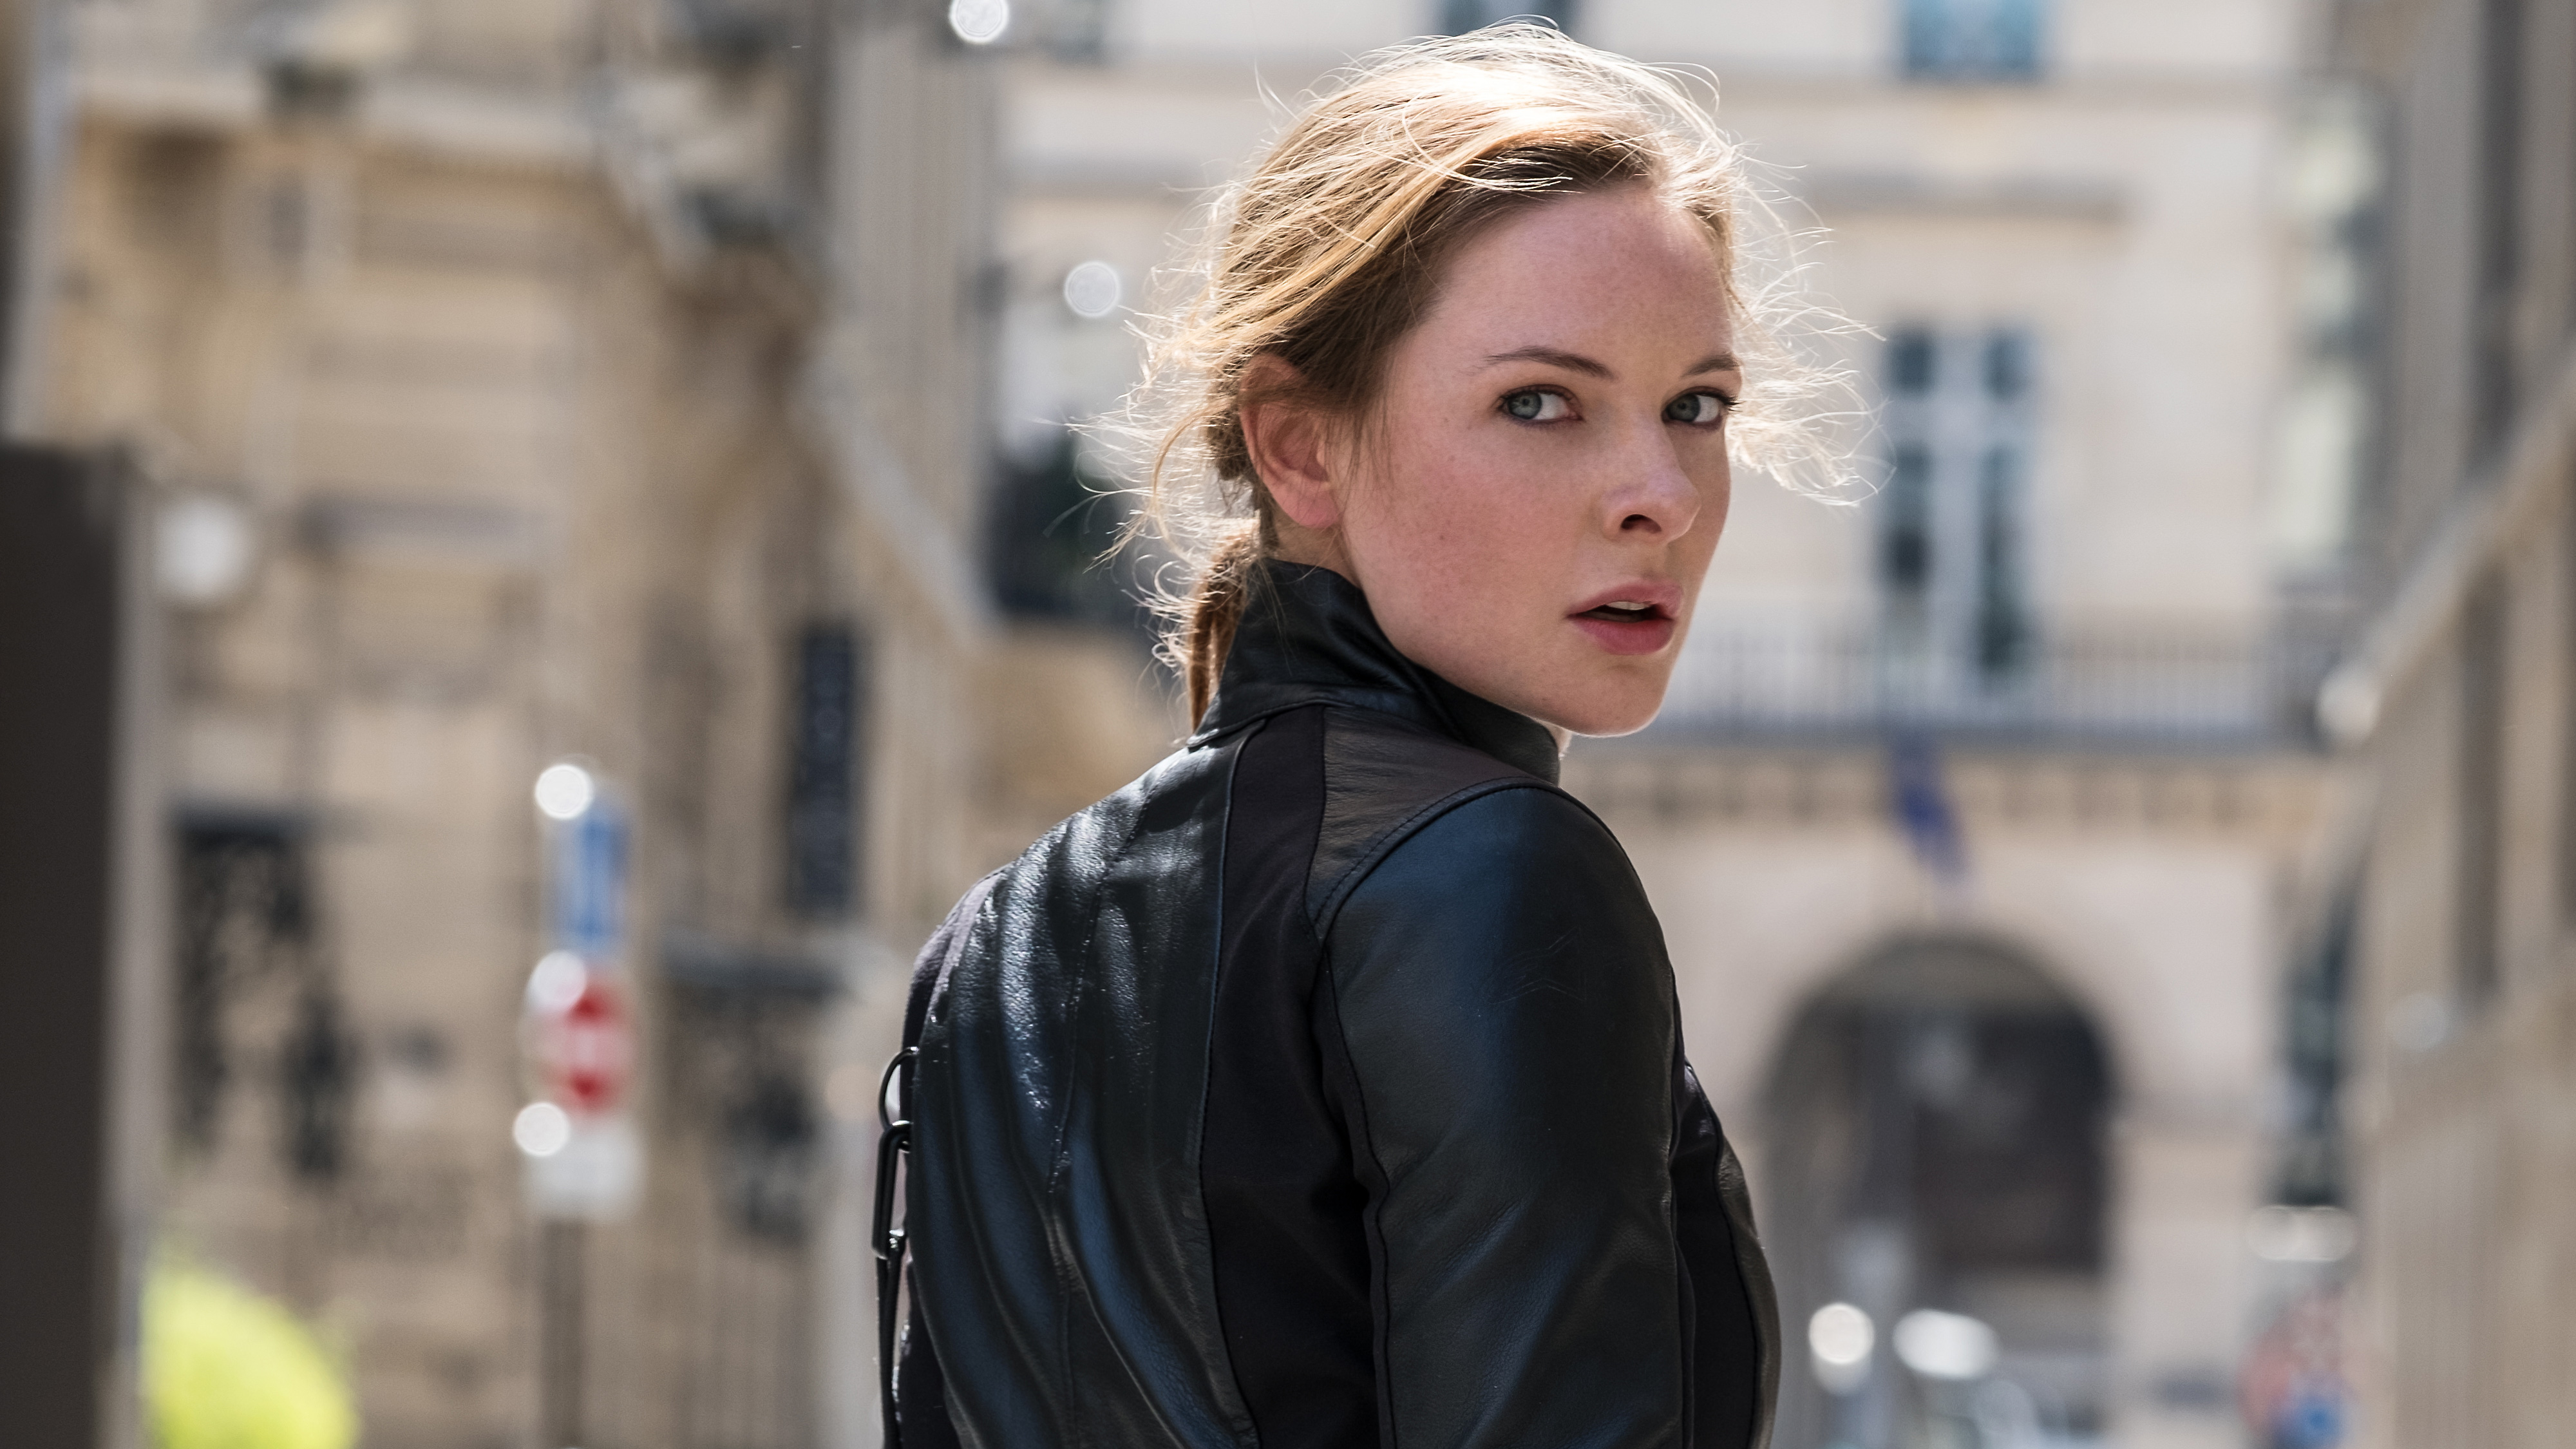 rebecca-ferguson-as-ilsa-faust-in-mission-impossible-fallout-hd-movies